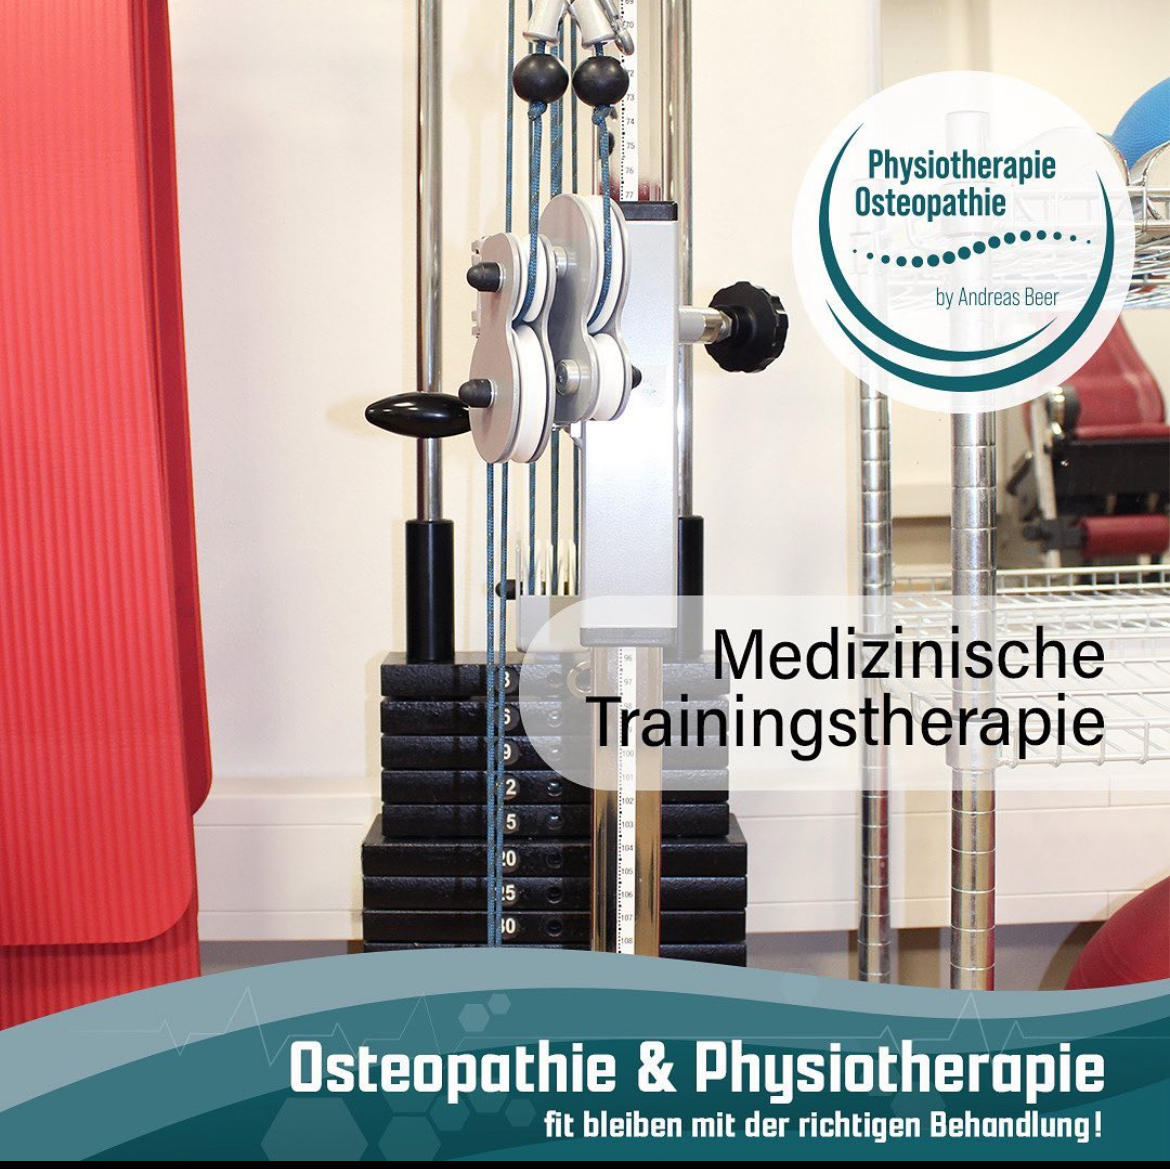 Bilder Physiotherapie & Osteopathie by Andreas Beer